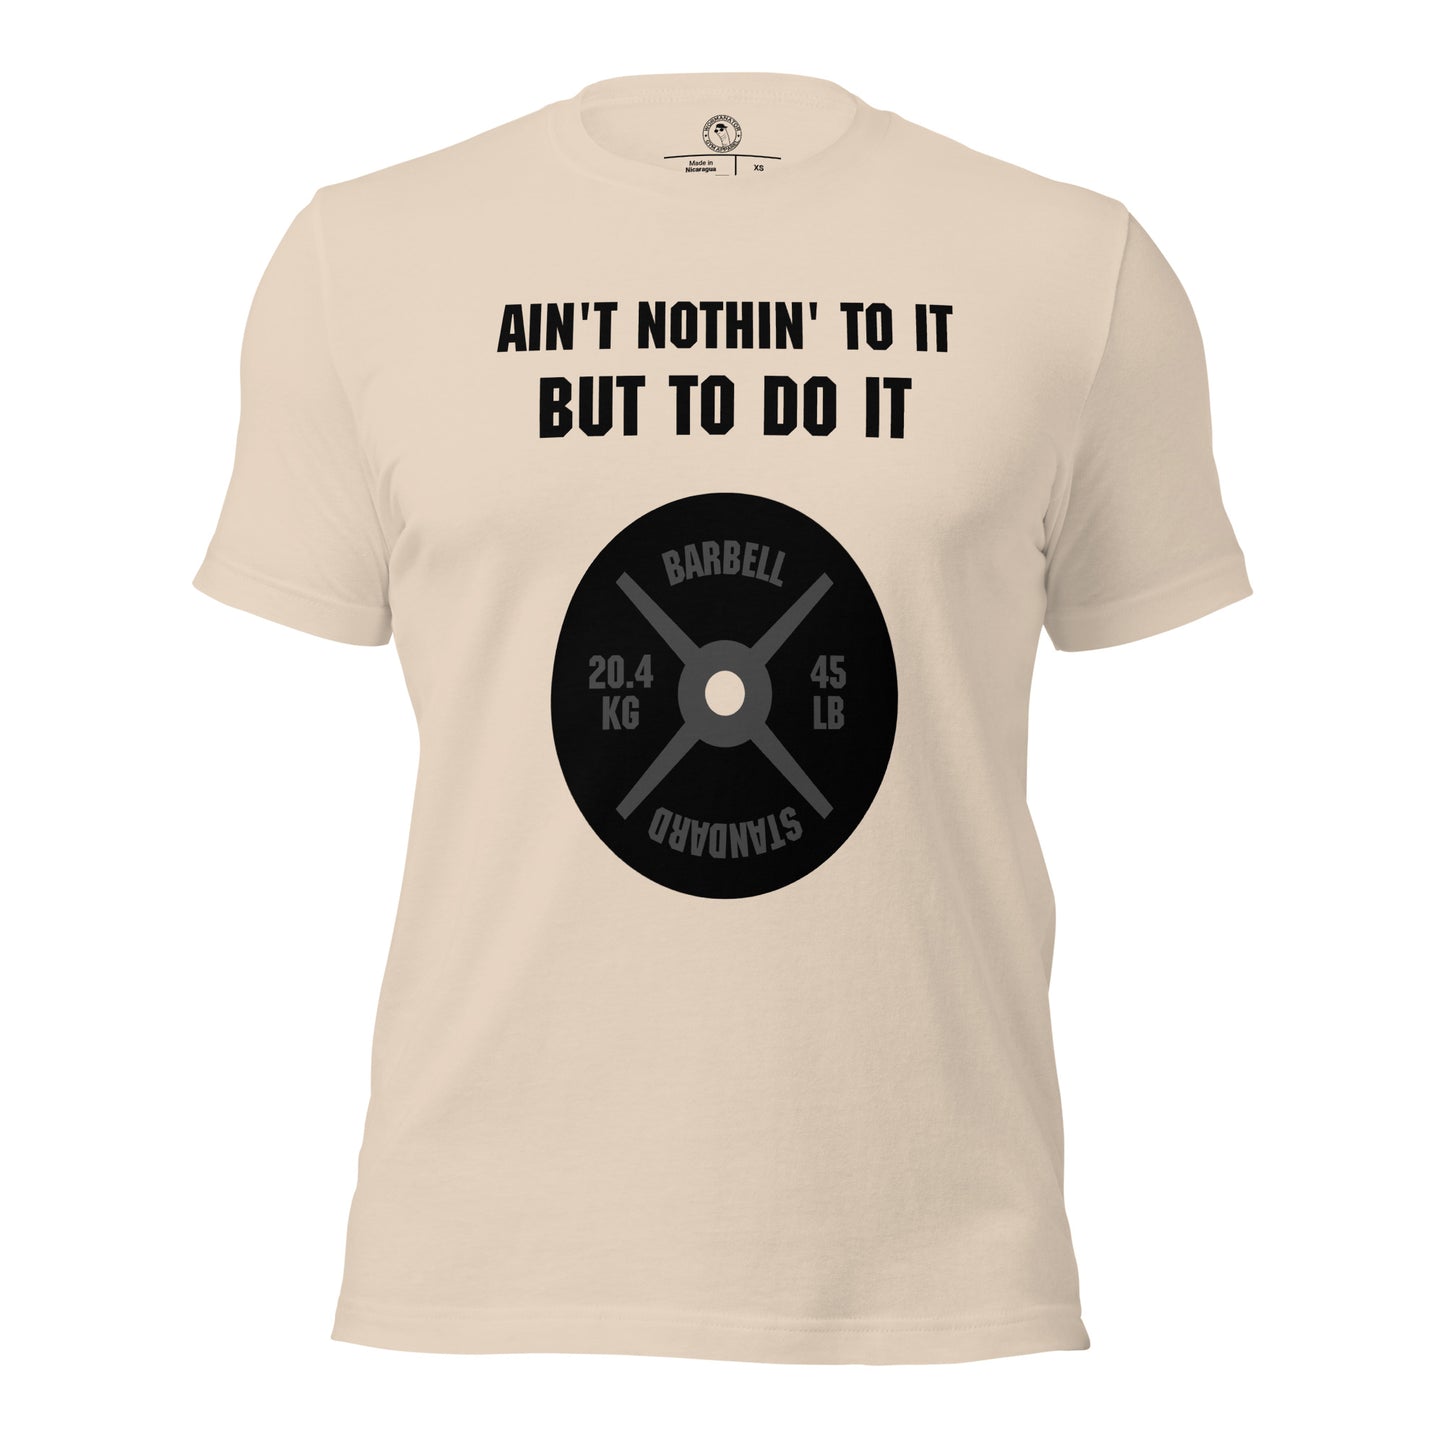 Ain't Nothin' To It But To Do It Shirt in Soft Cream